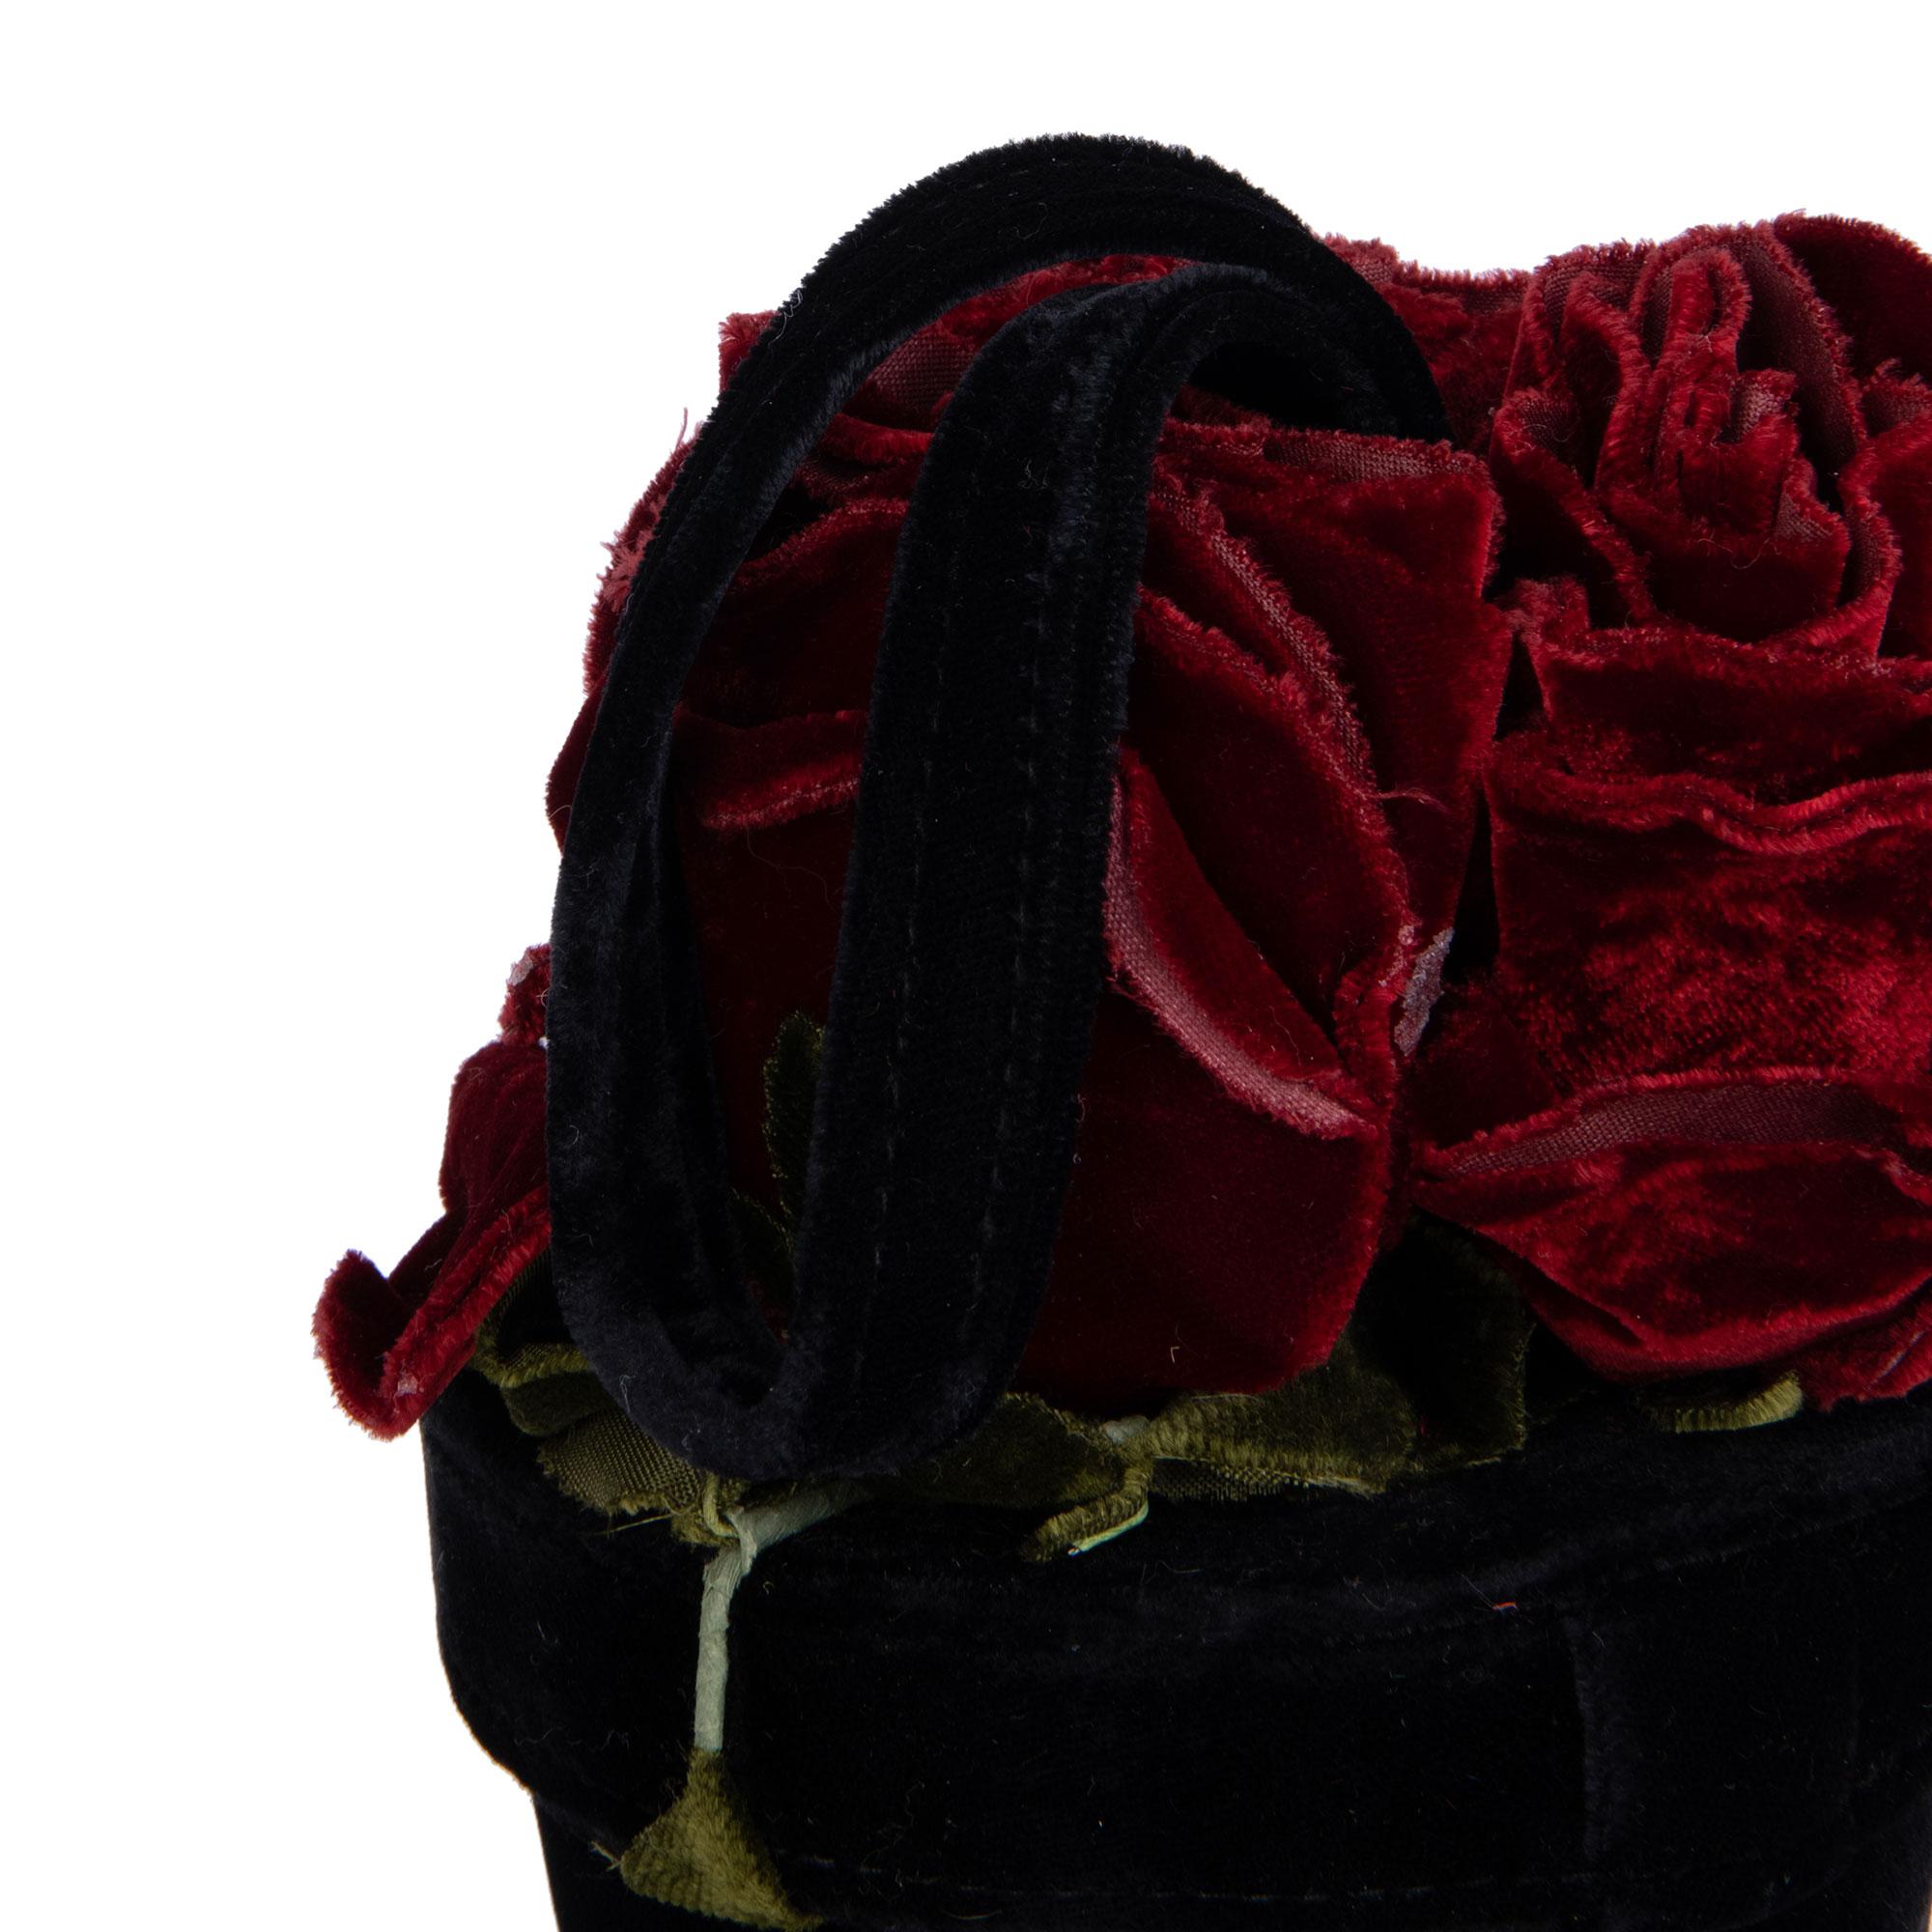 LULU GUINNESS
Black, Red & Green Velvet Vintage Florist Pot Bag

Xupes Reference: WAHF-HB011
Age (Circa): 1990
Authenticity Details: (Made in England)
Gender: Ladies
Type: Top Handle

Colour: Black, Red, Green
Material(s): Velvet
Interior: Black